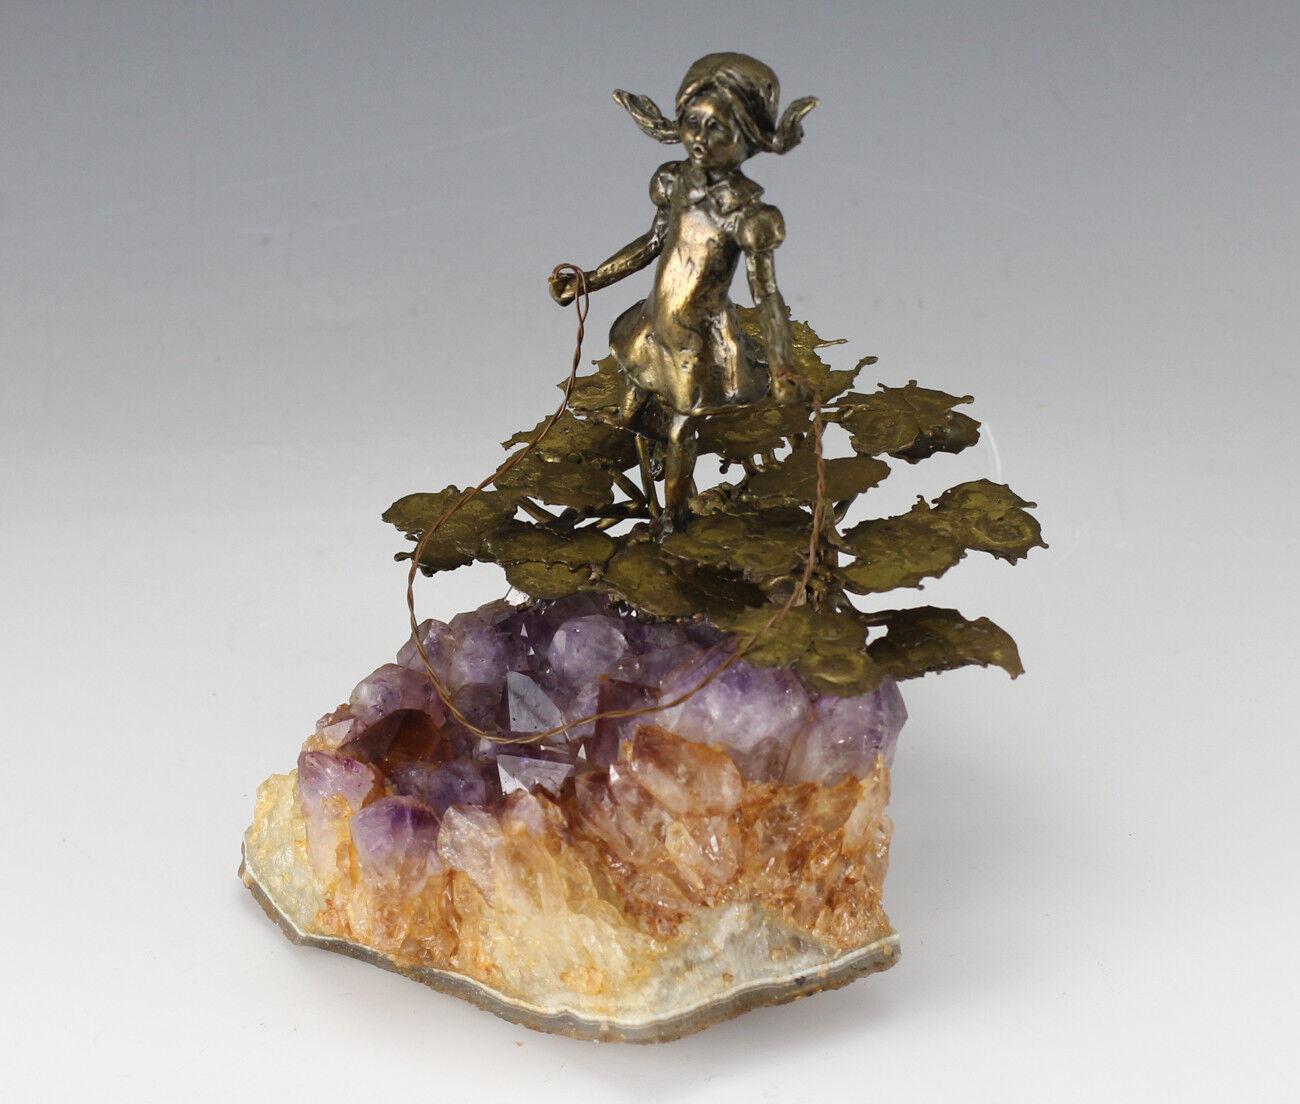 Bronze Sculpture on Amethyst Crystals, Small Girl Jumping Rope In Good Condition For Sale In Gardena, CA